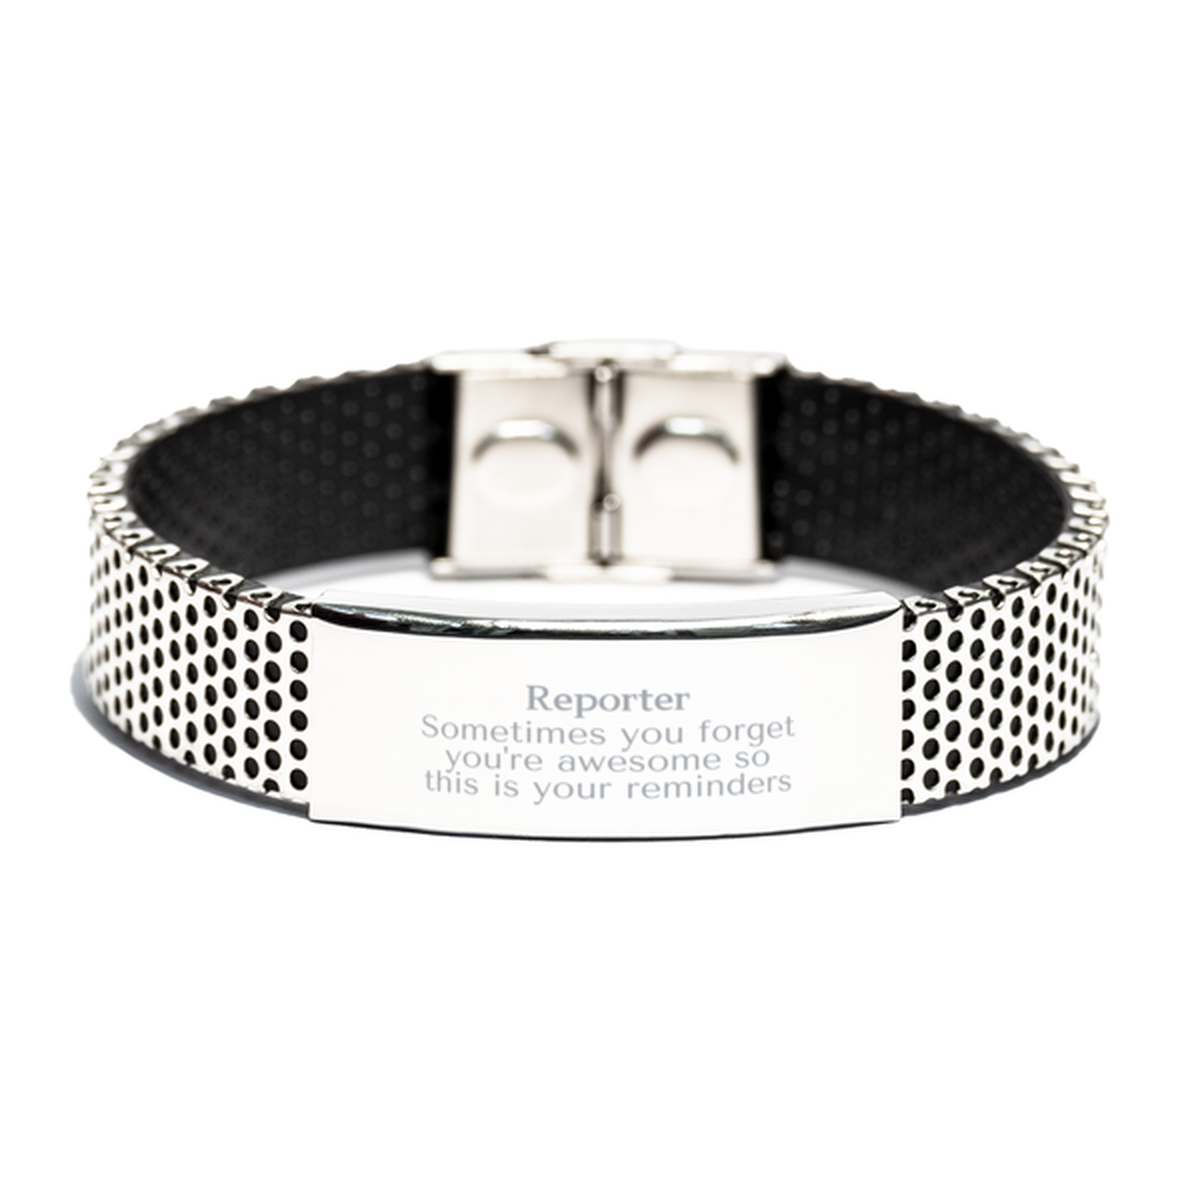 Sentimental Reporter Stainless Steel Bracelet, Reporter Sometimes you forget you're awesome so this is your reminders, Graduation Christmas Birthday Gifts for Reporter, Men, Women, Coworkers